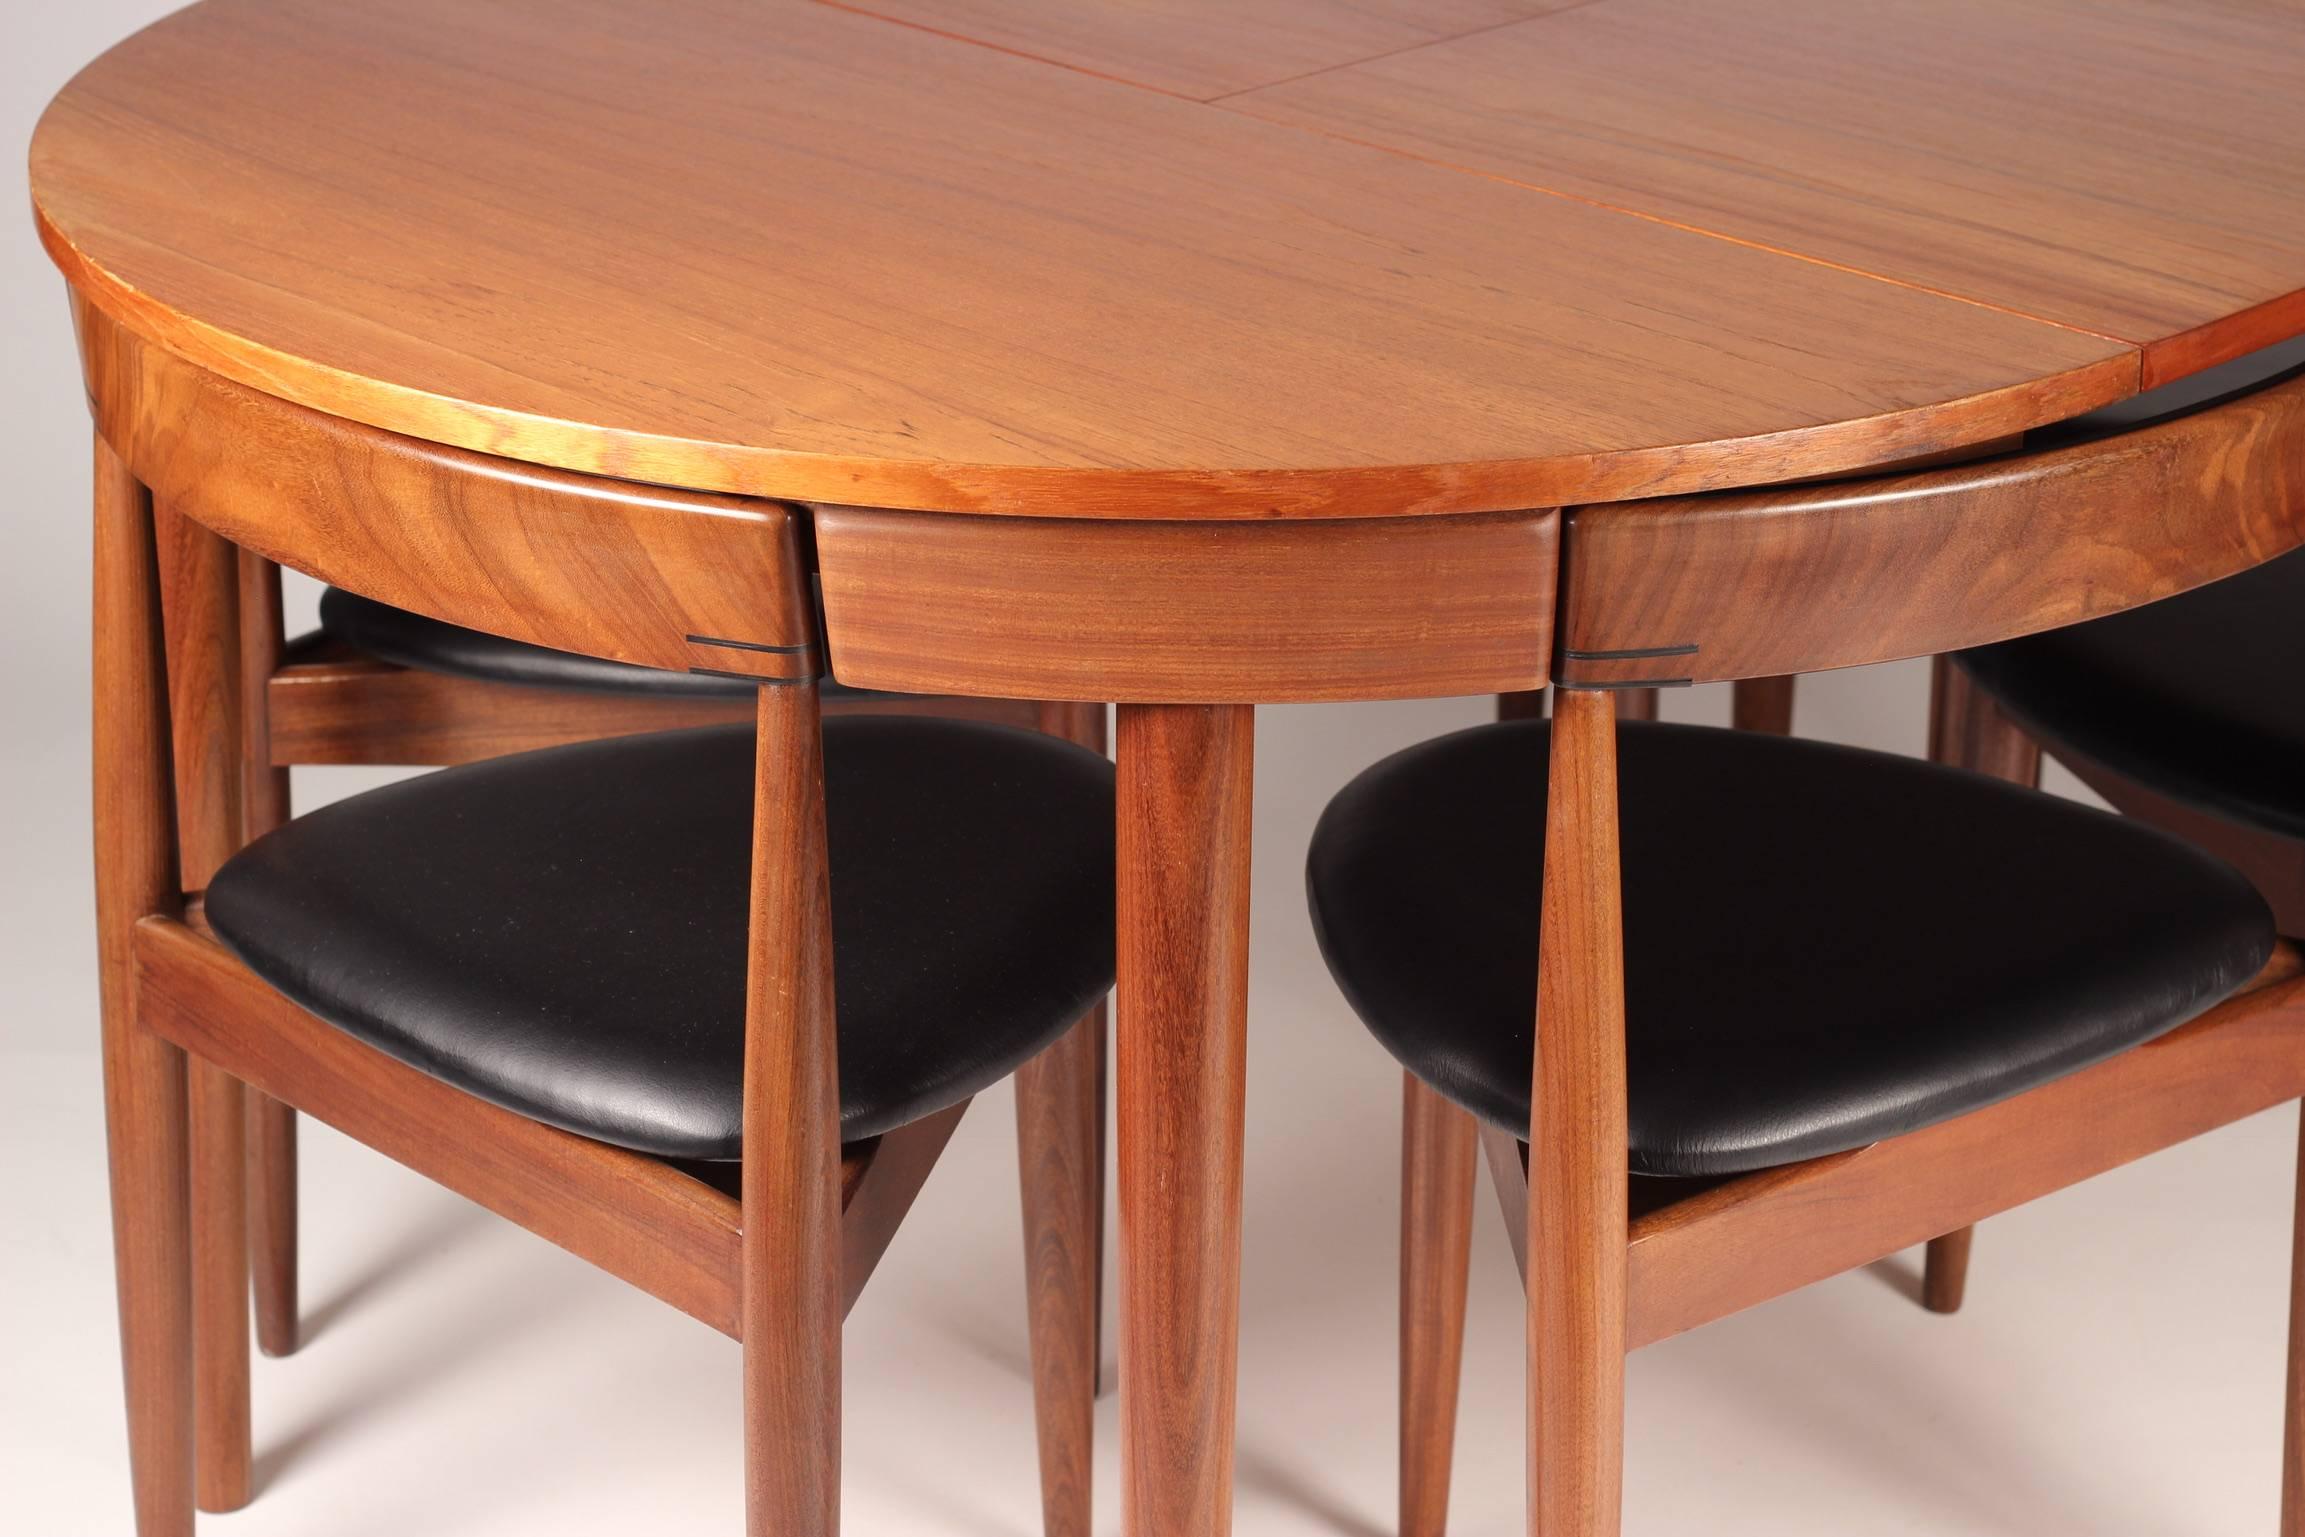 Scandinavian Modern designed, rare teak and leather model Roundette dining table and six chairs. The table expands from a round that accommodates four chairs neatly tucked around its outer rim, up to an expansive roundel which you can then pull up